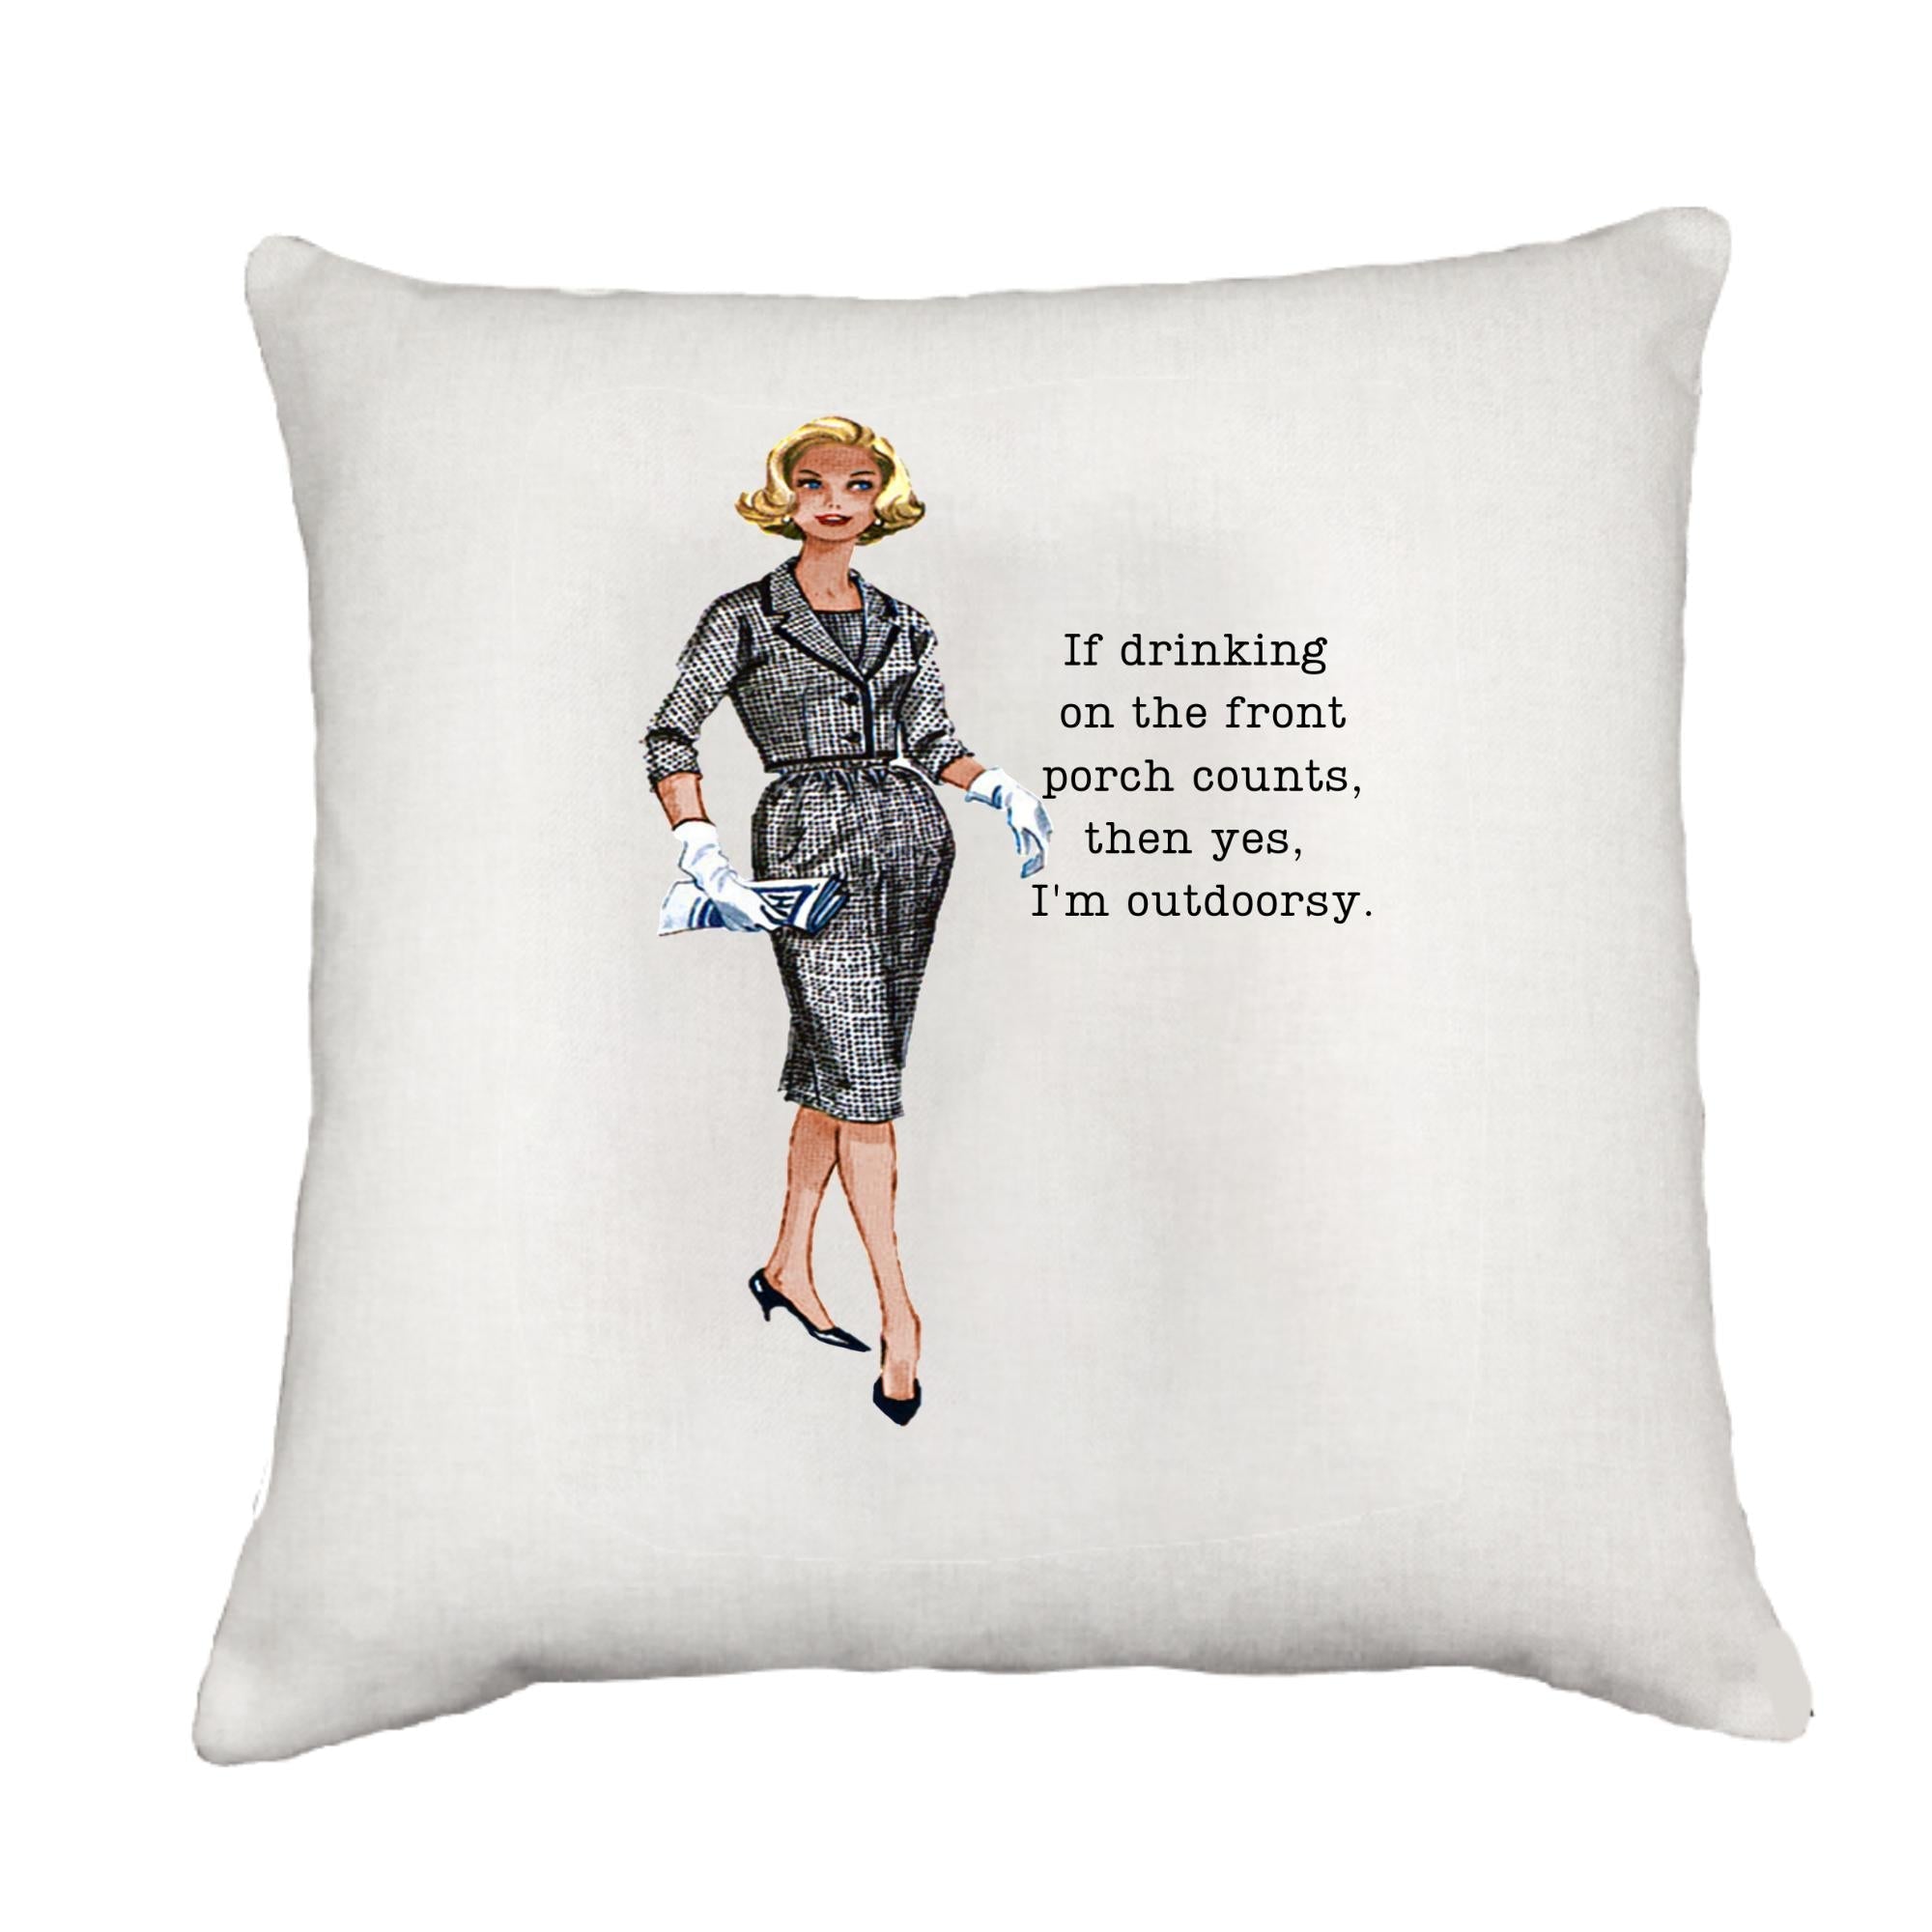 Outdoorsy Cottage Pillow Throw/Decorative Pillow - Southern Sisters